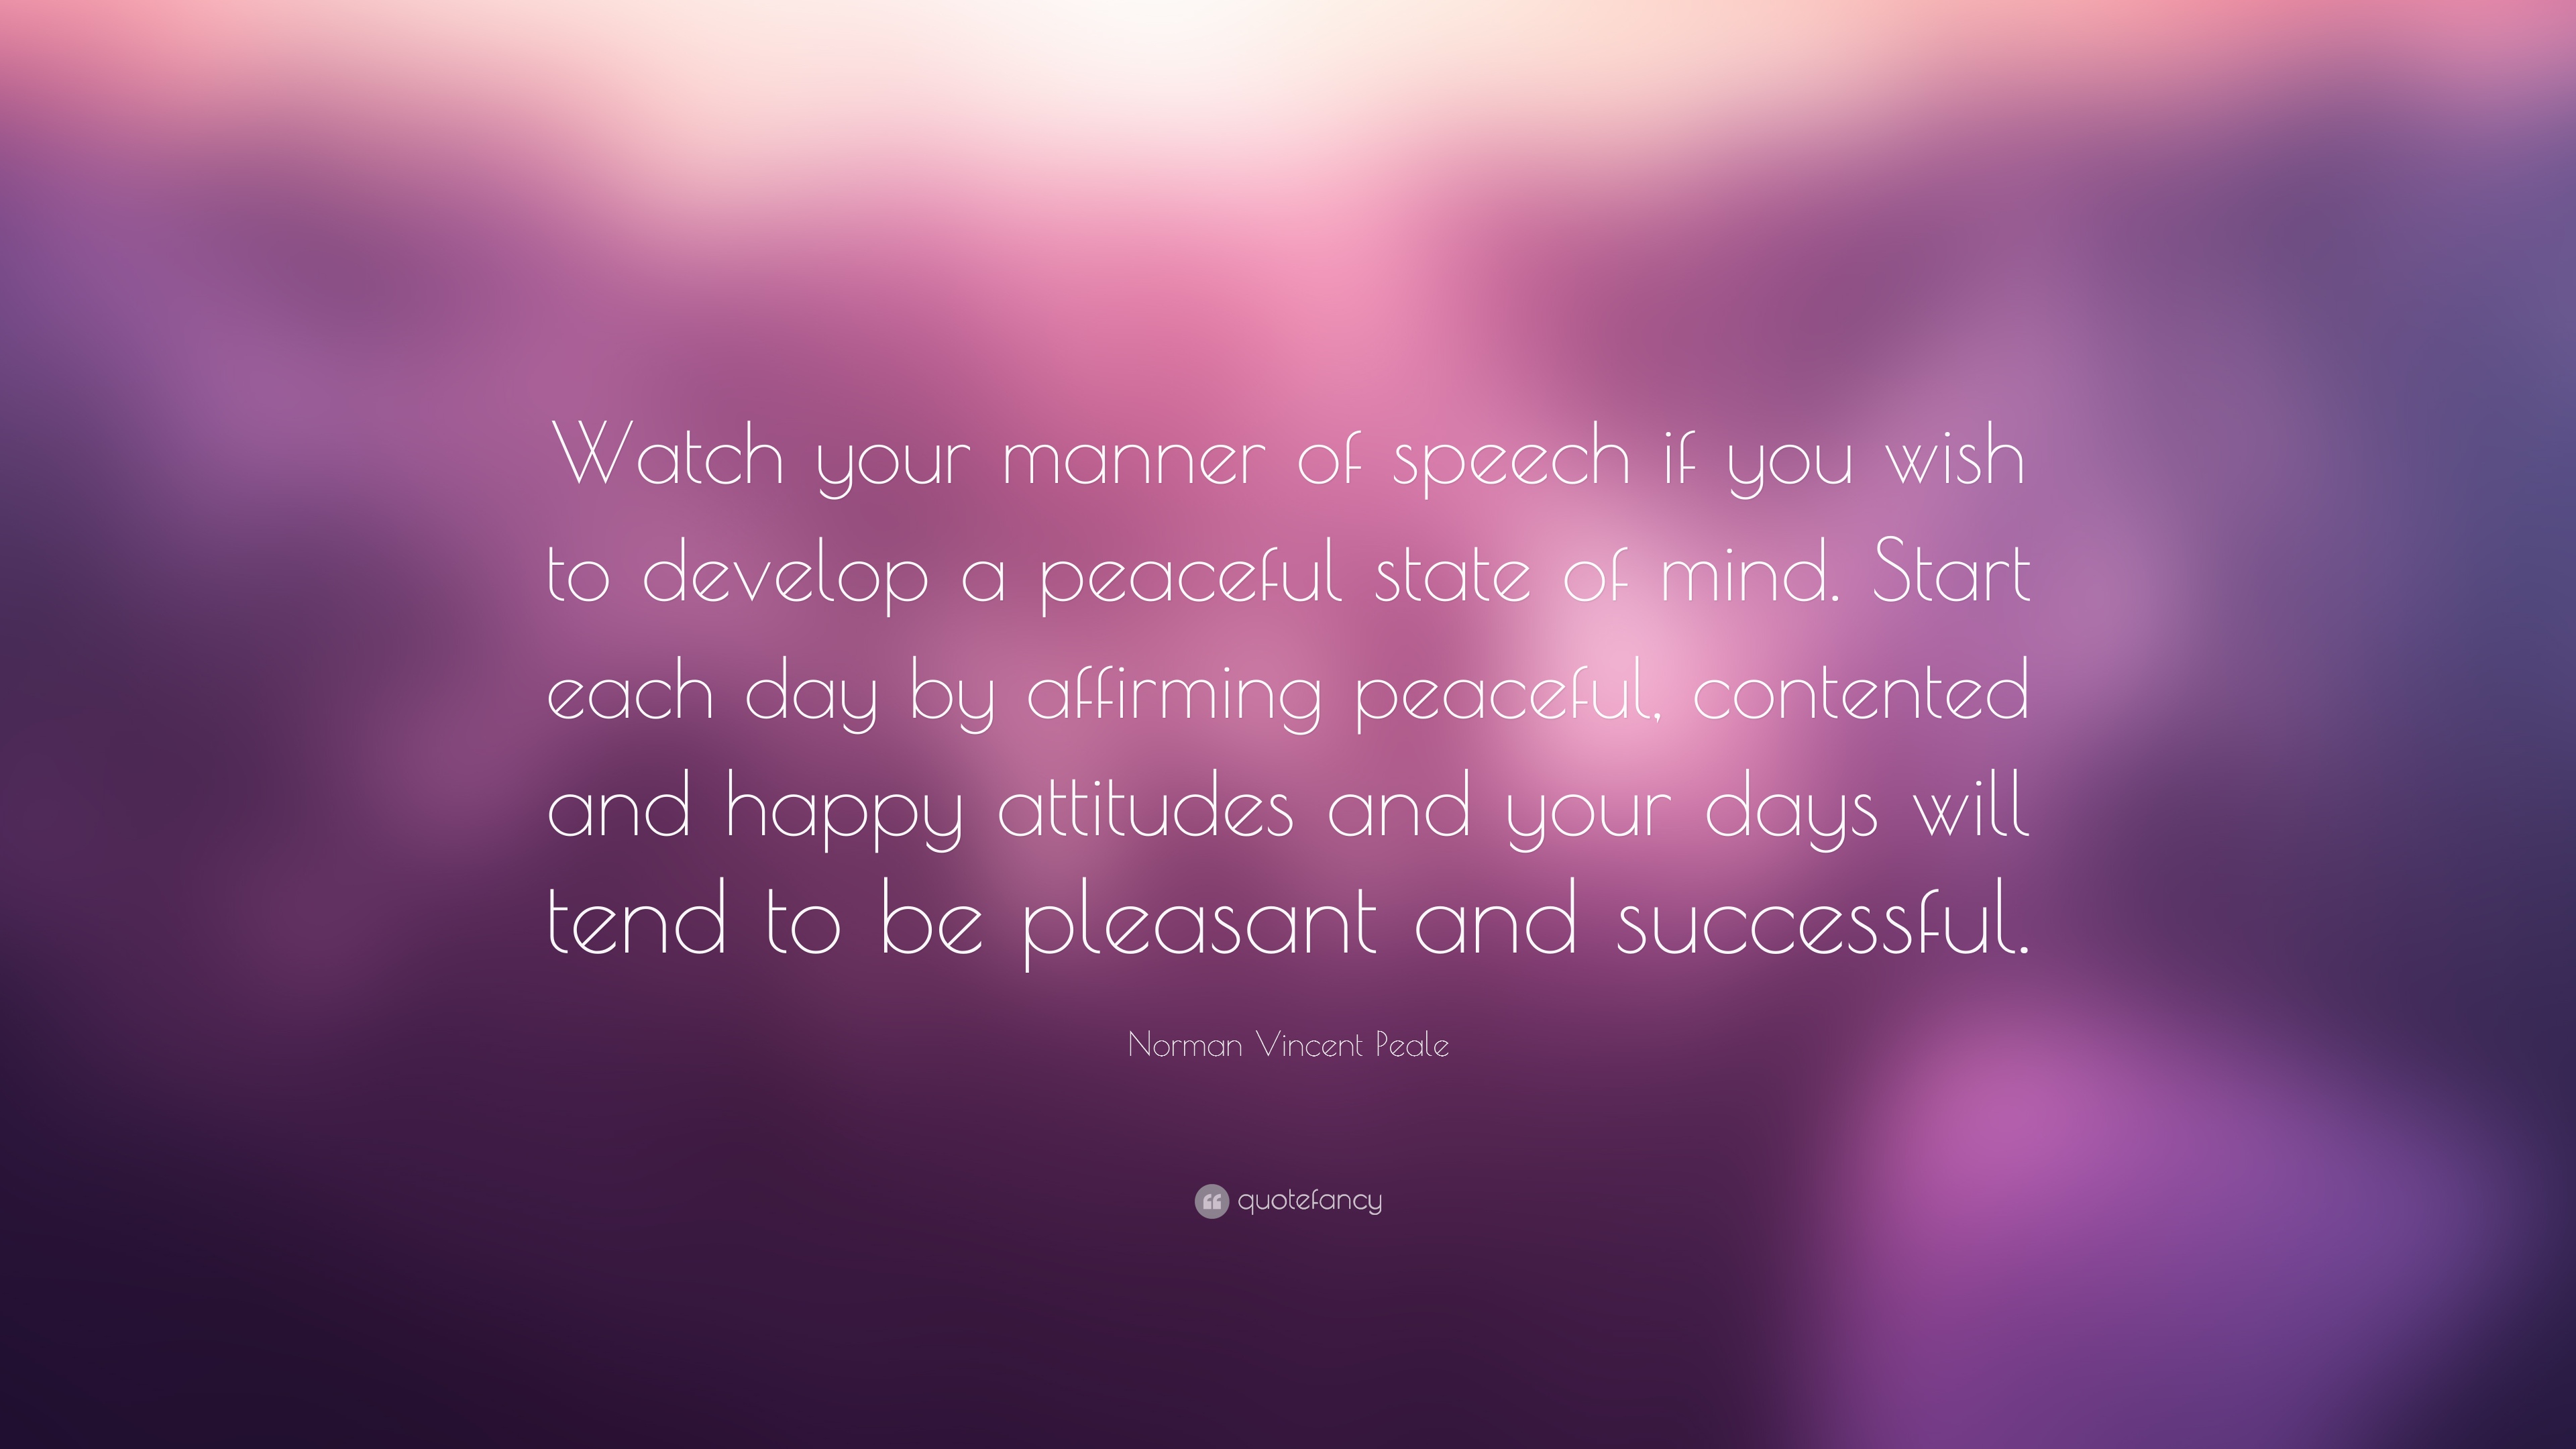 Norman Vincent Peale Quote: “Watch your manner of speech if you wish ...